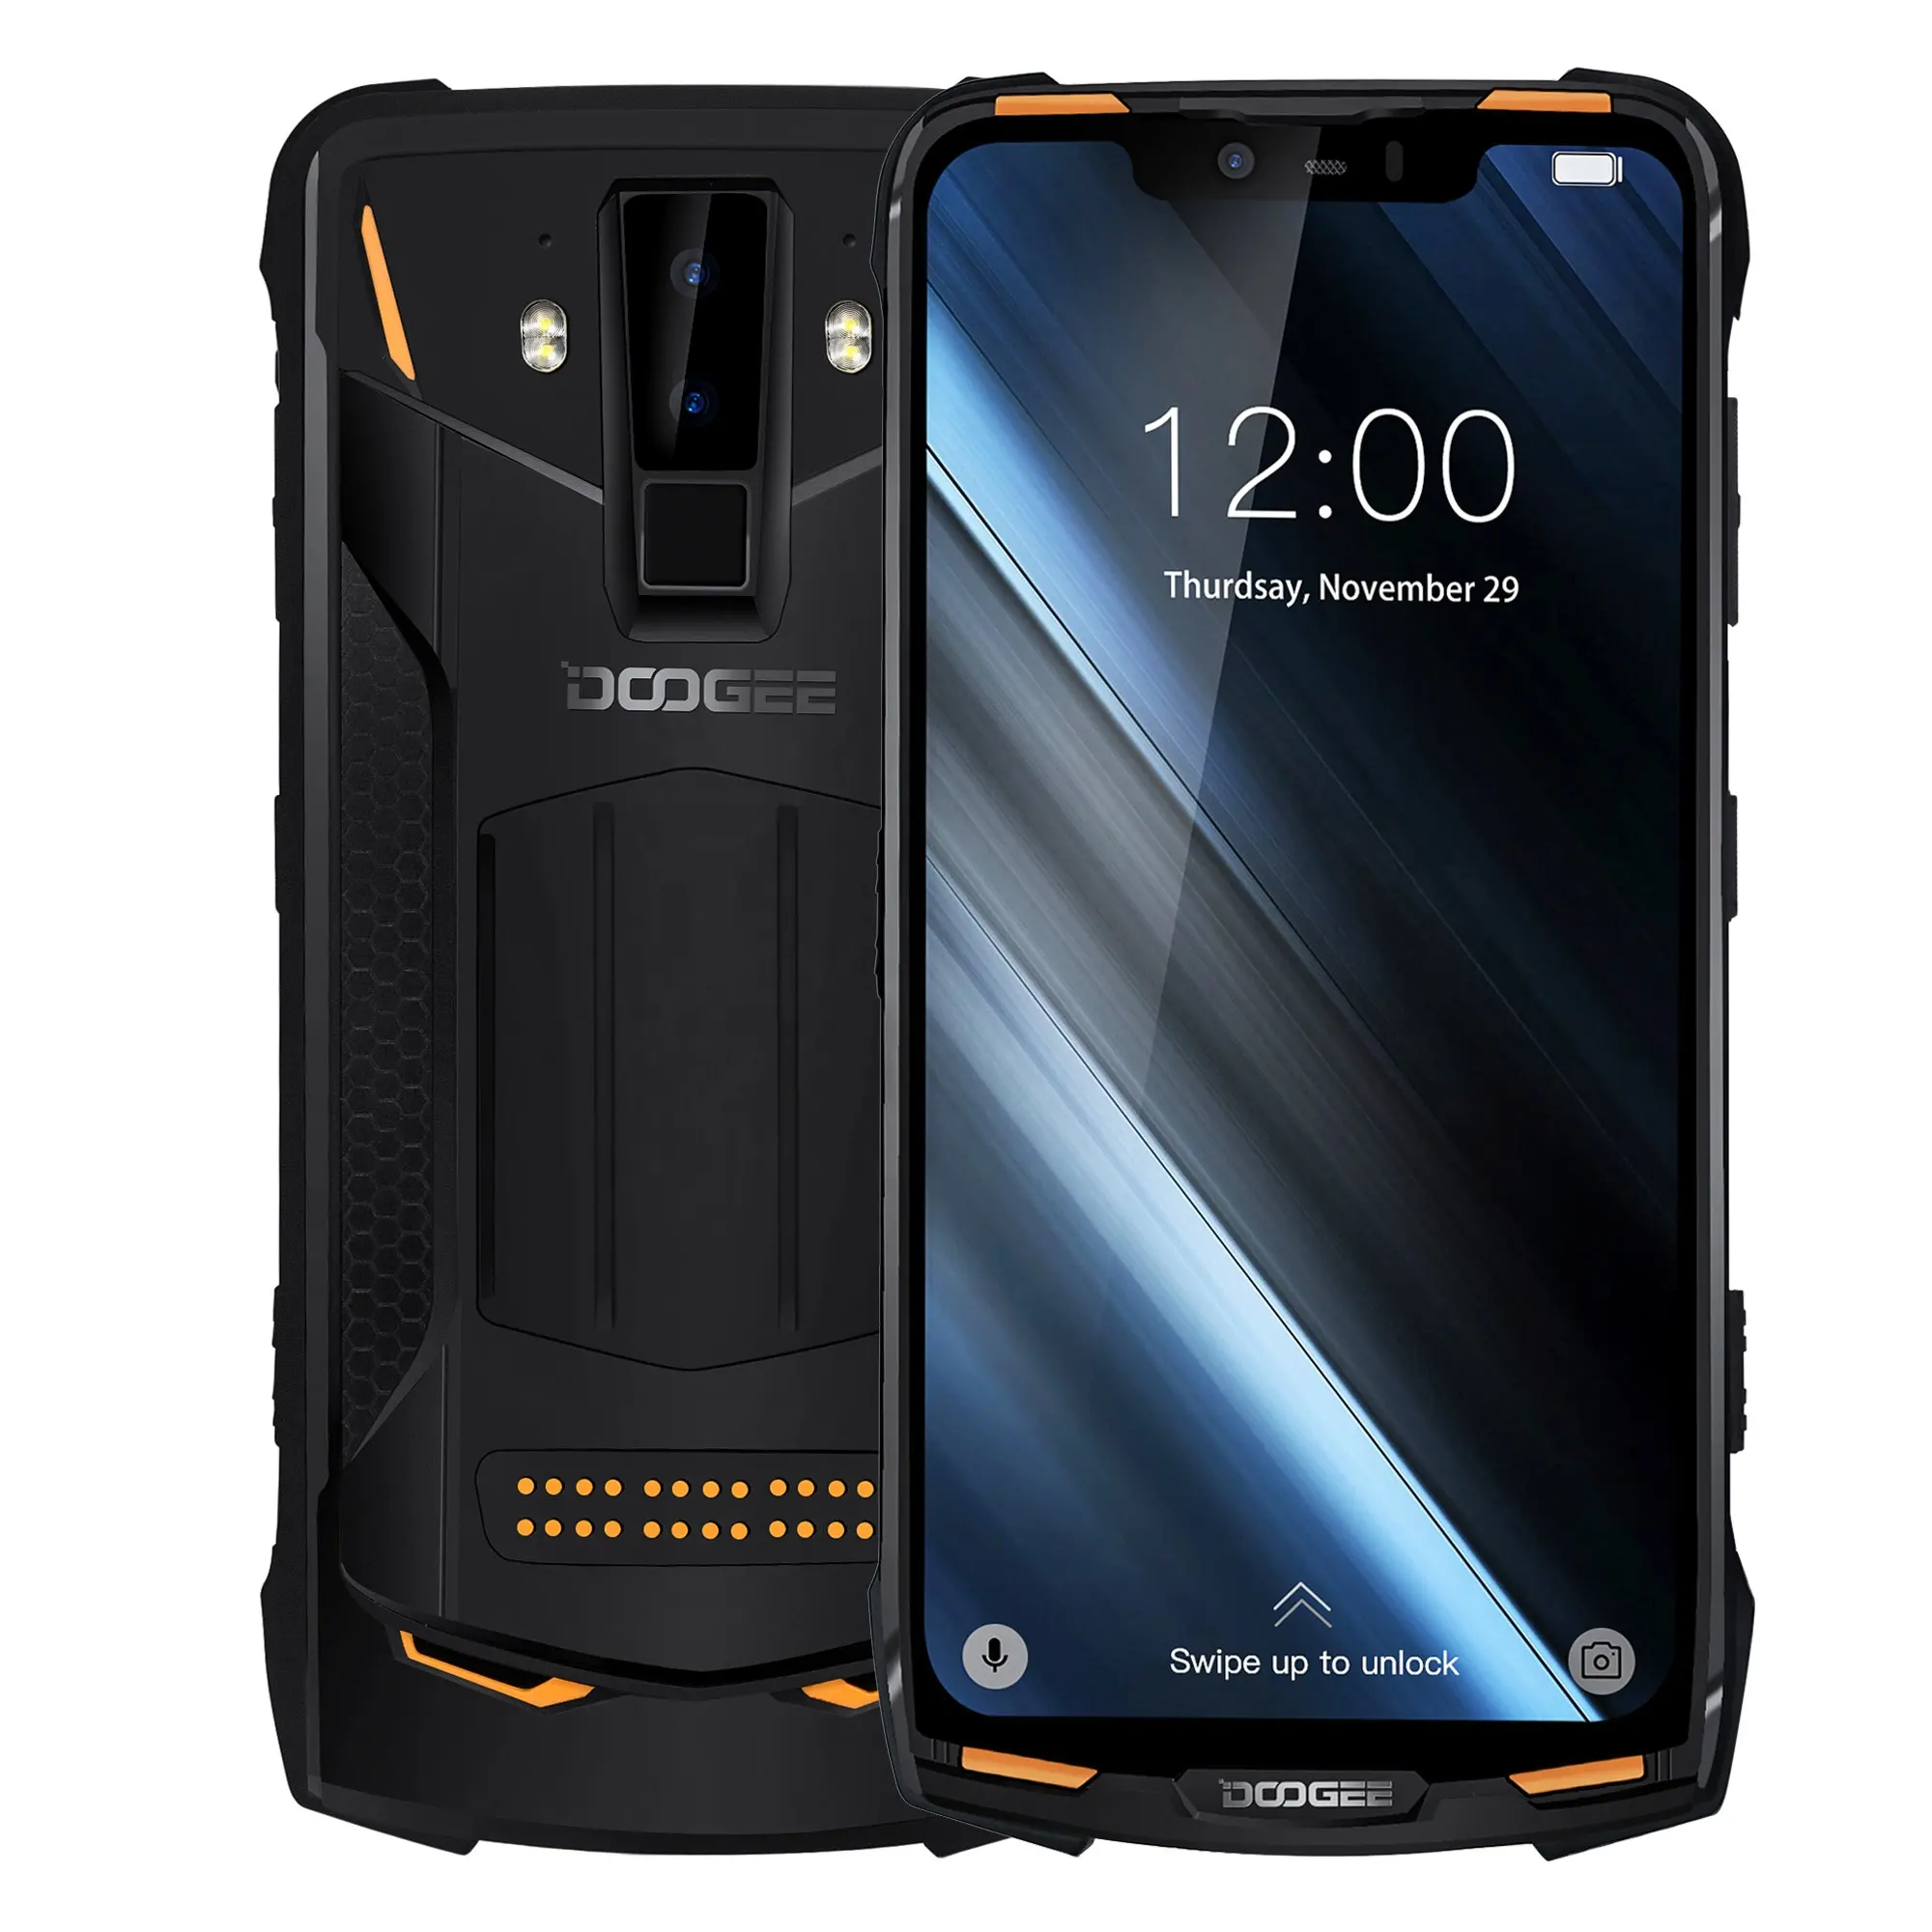 S90C SUPER Rugged Smartphone 6.18 inch Display 4GB 64GB Android 9.0 System 1080*2246 FHD+ Rugged Phone